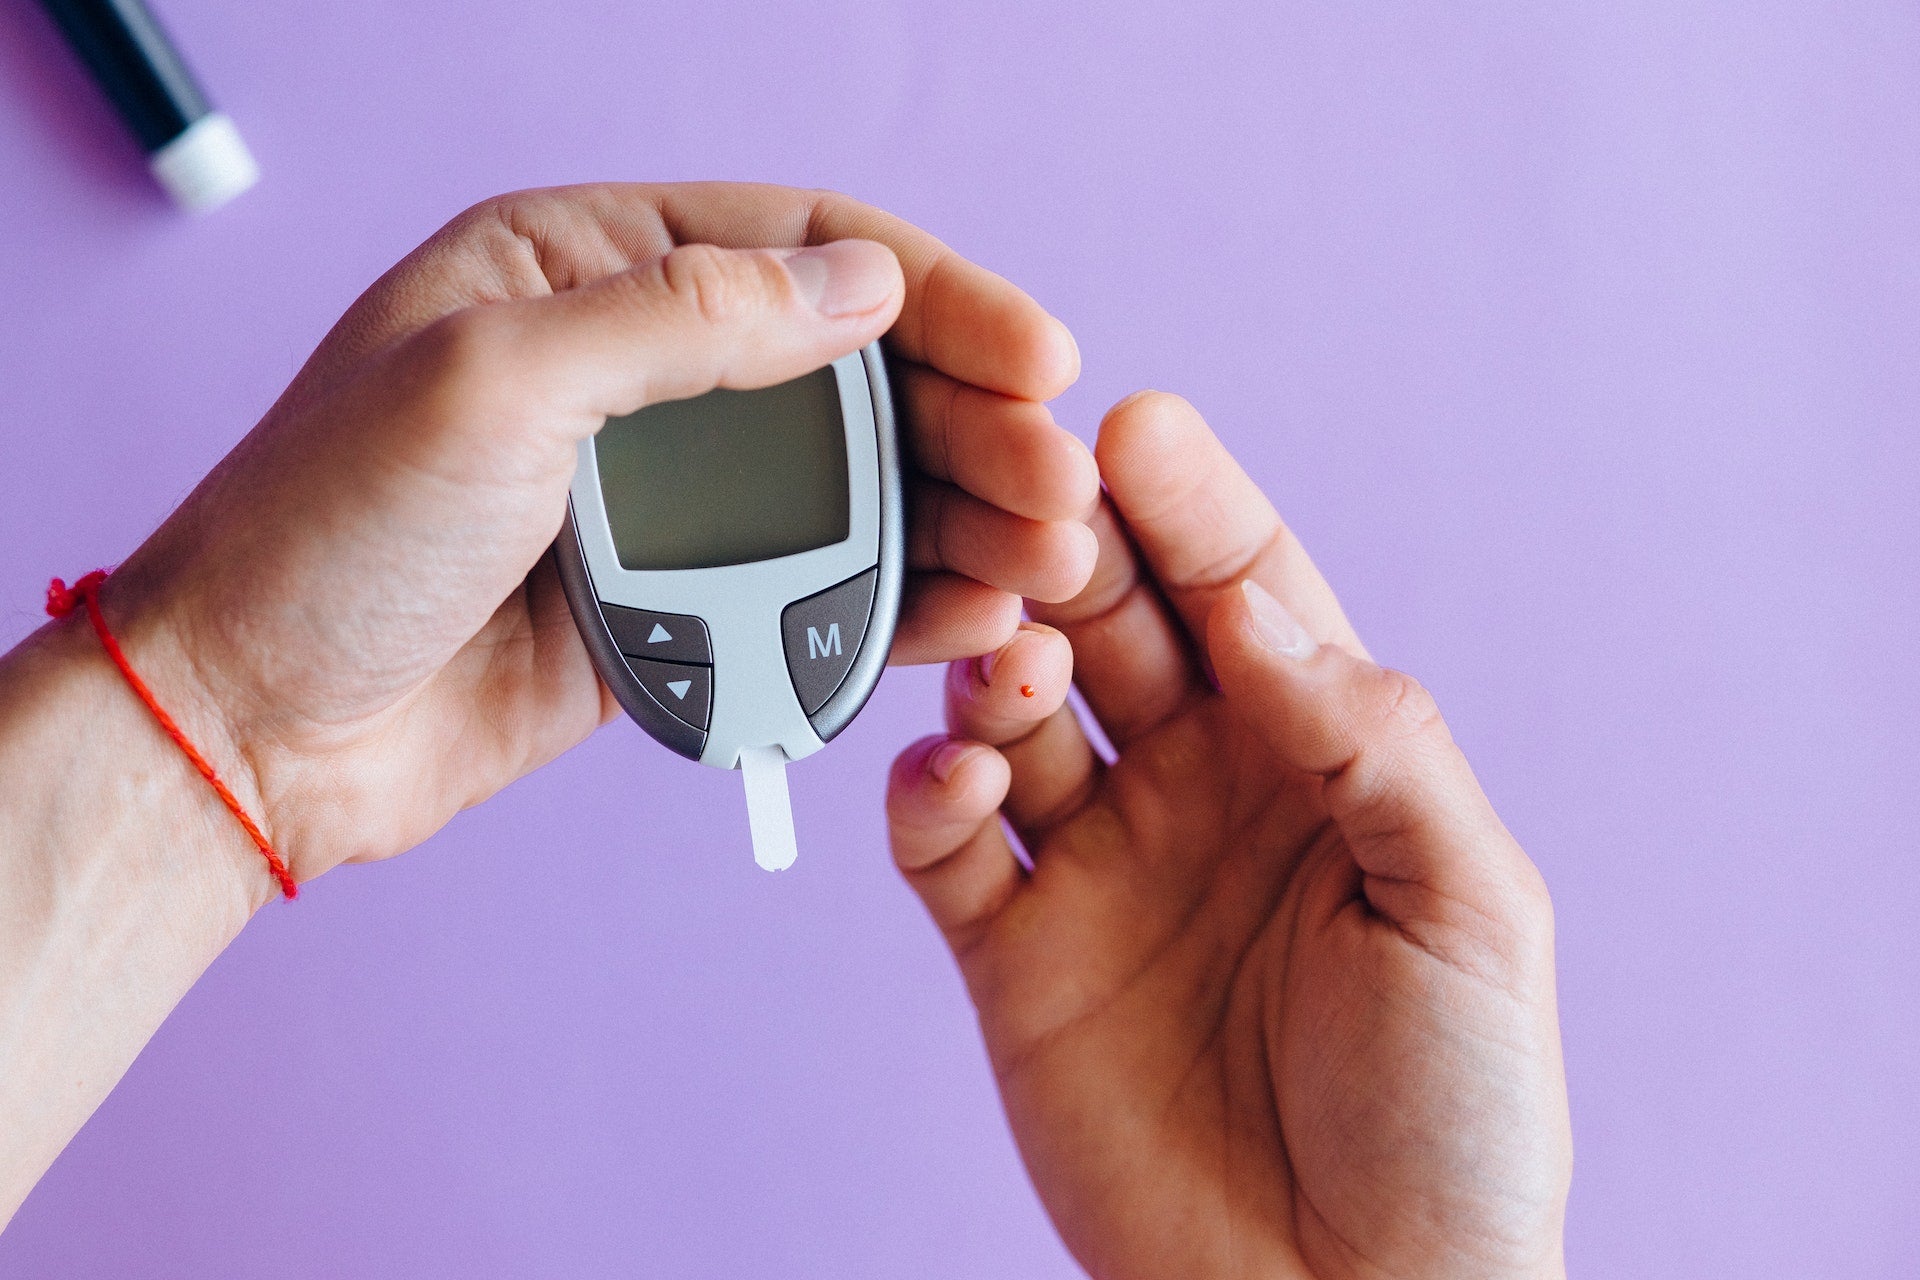 a person holding a glucose meter